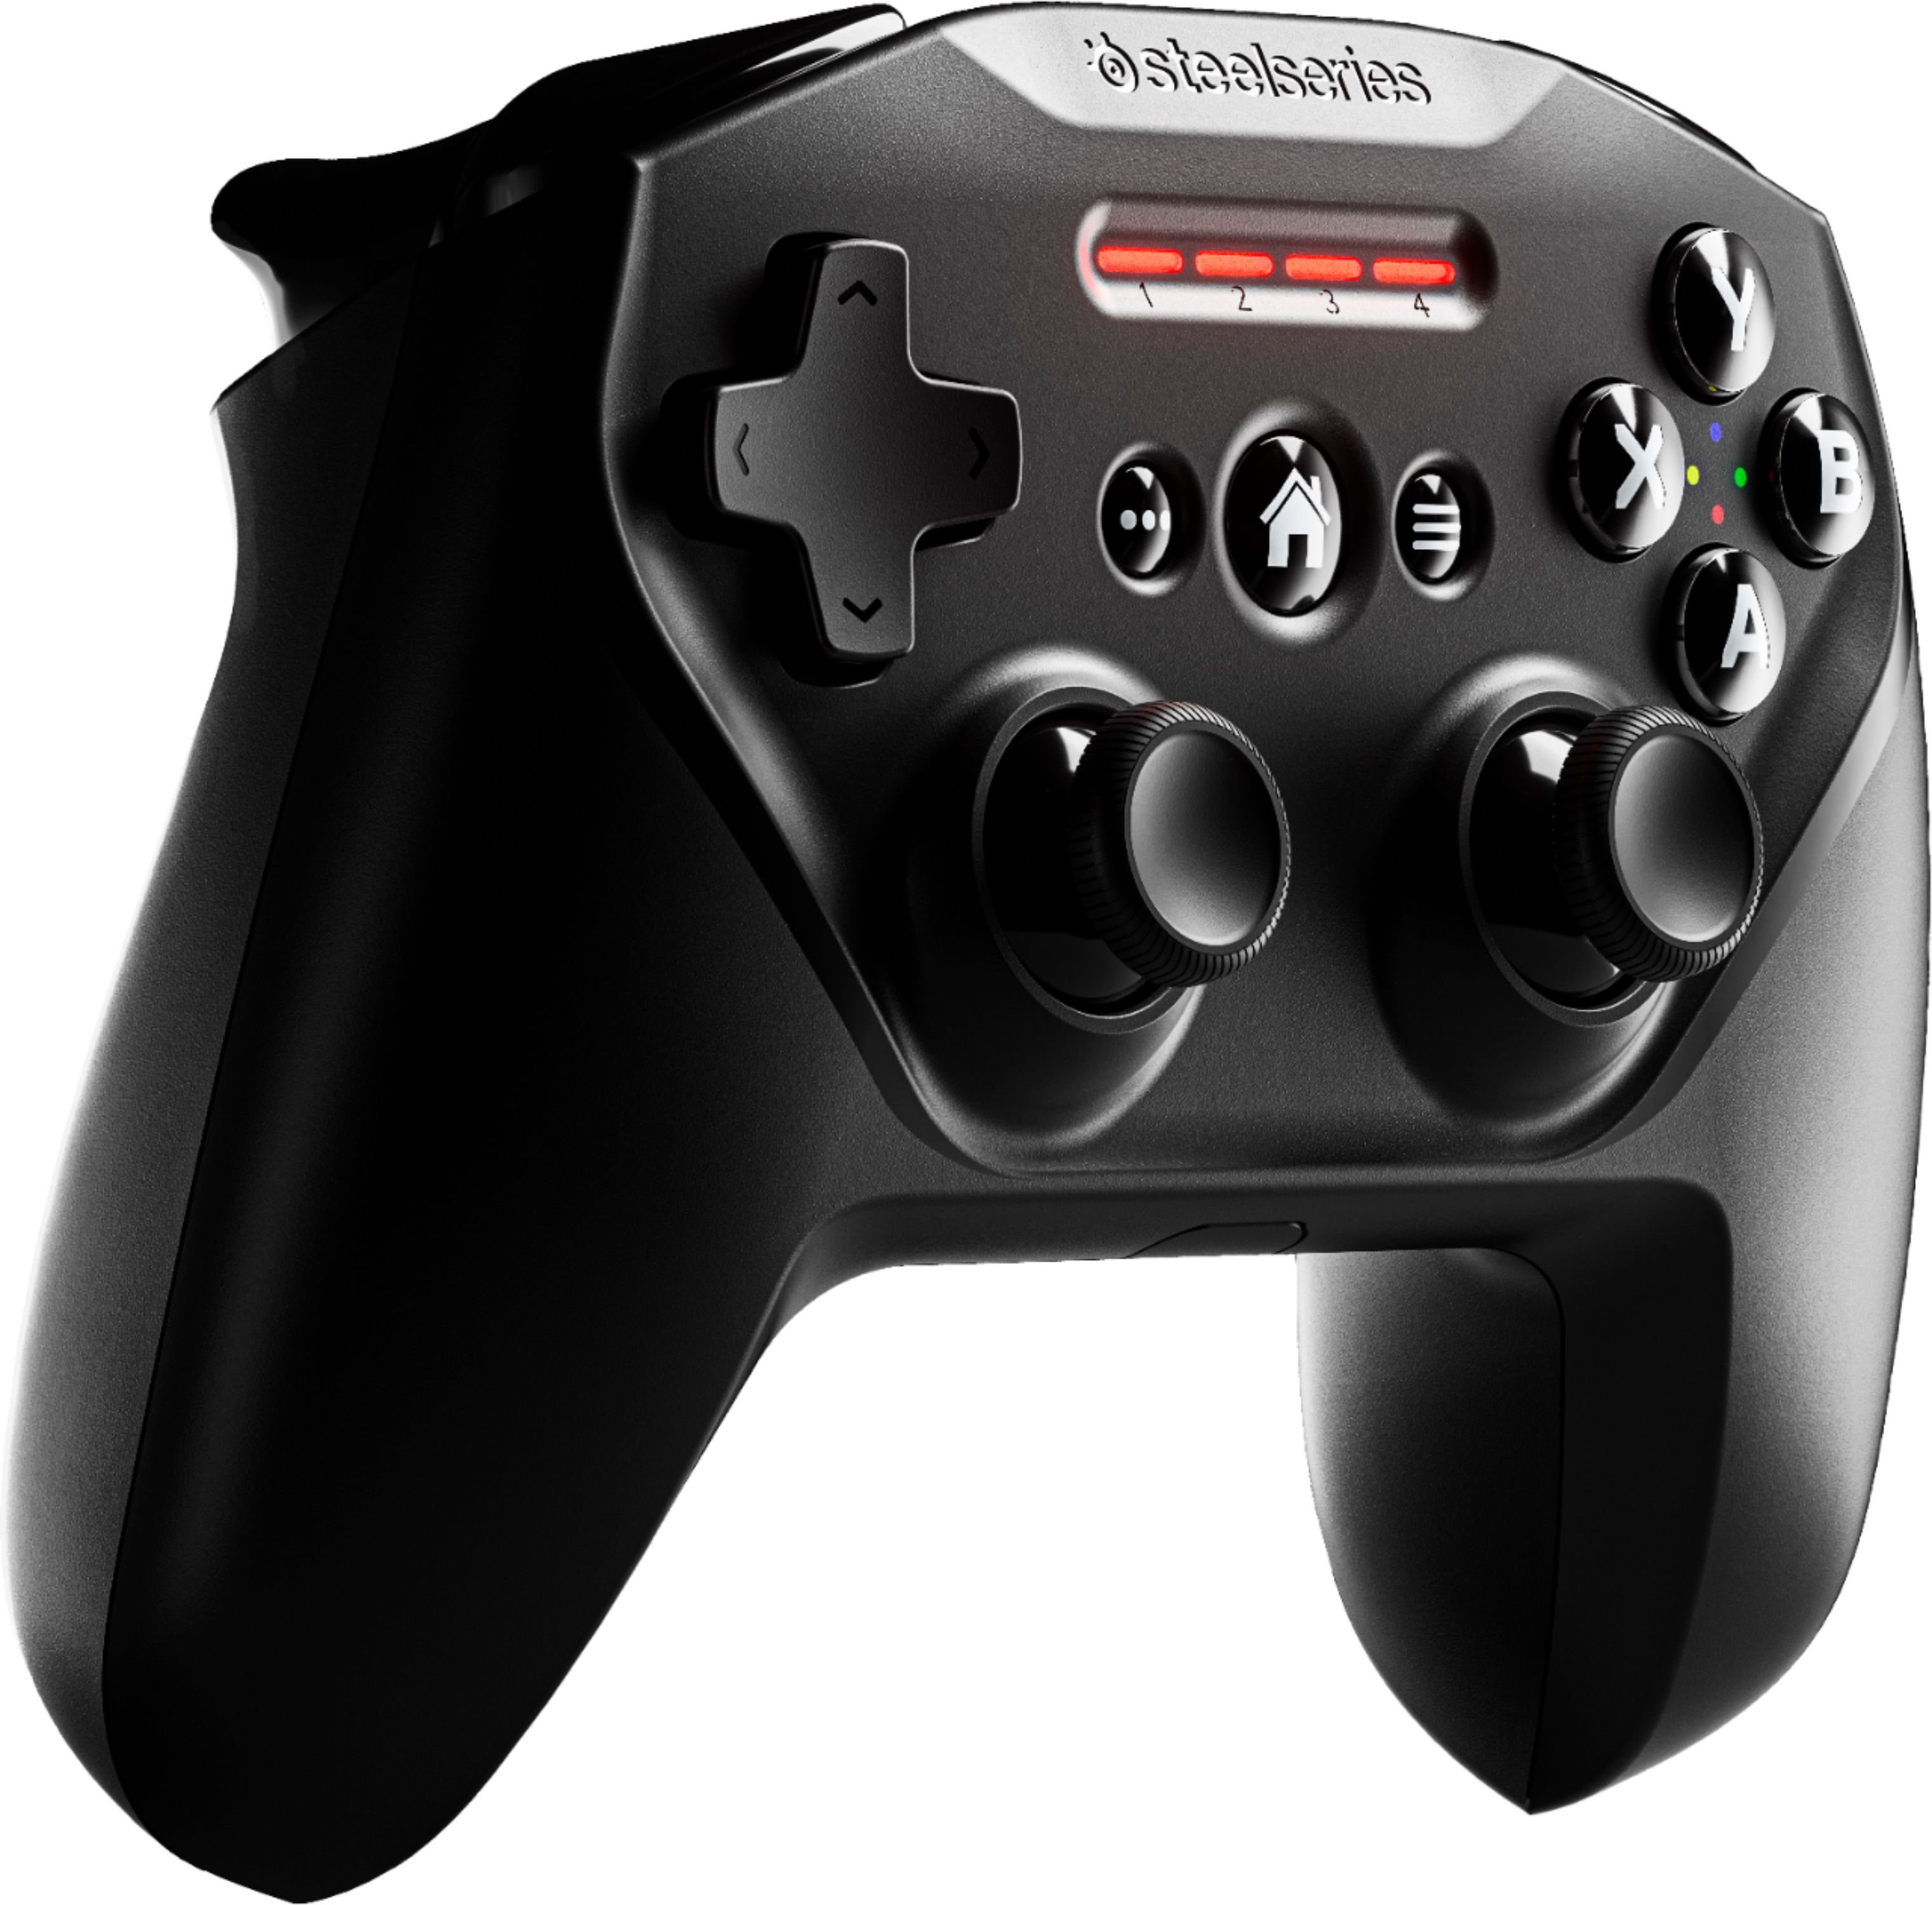 Angle View: Rotor Riot - RR1852 Controller for Apple iOS7 or later devices - Black